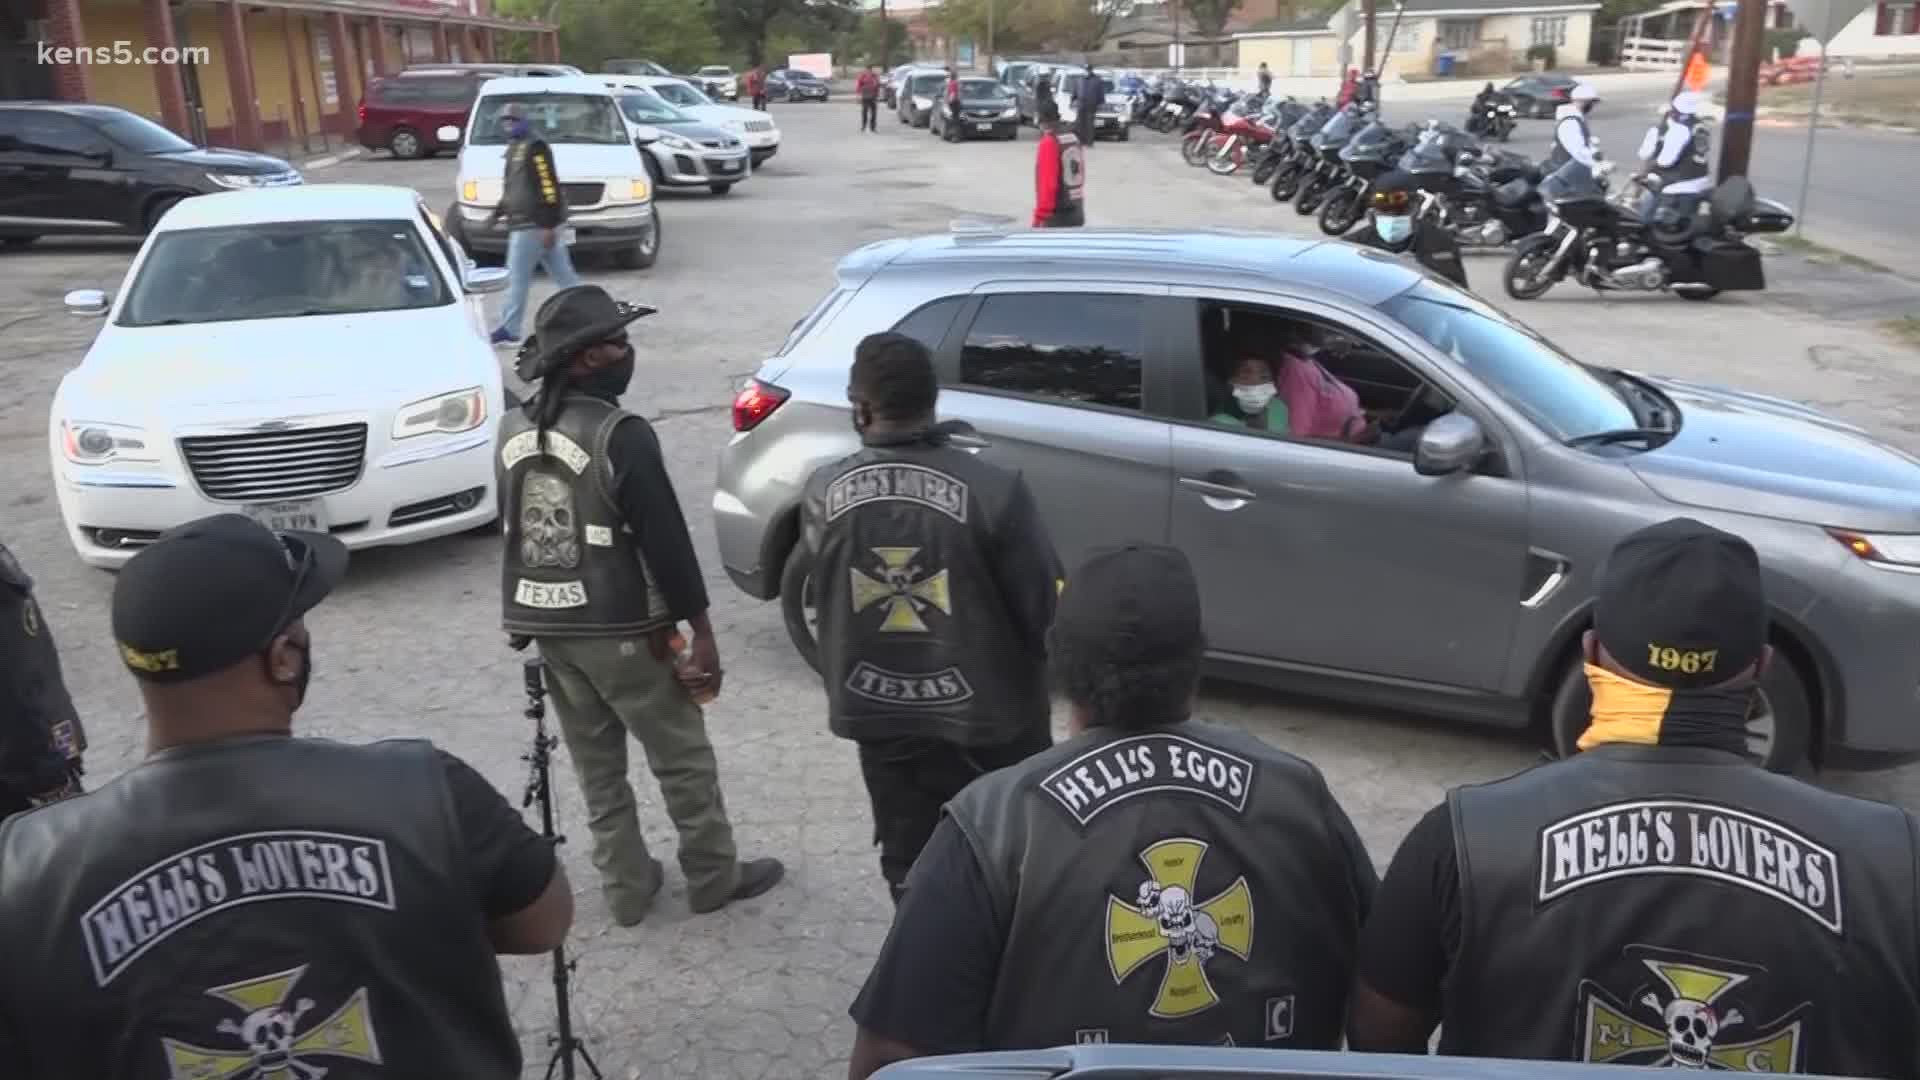 About 20 biker clubs across San Antonio, all predominantly black, have partnered together to pass out 500 Thanksgiving turkeys to families in need drive thru style.